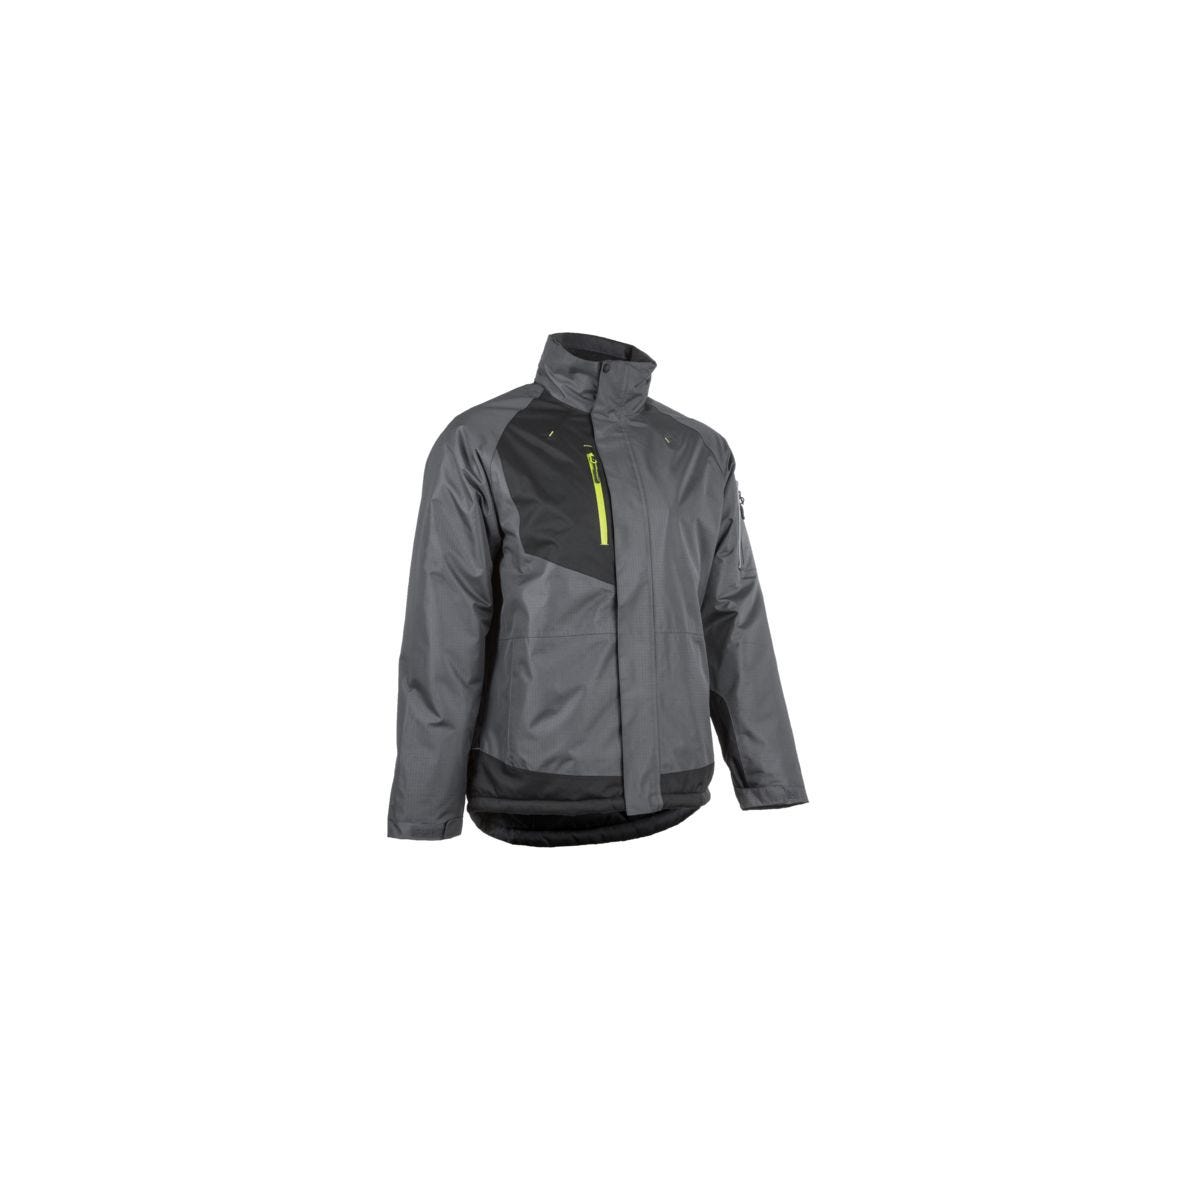 YUZU Parka anthracite/noir, Polyester Ripstop + Polaire 300g/m² - COVERGUARD - Taille 2XL 0